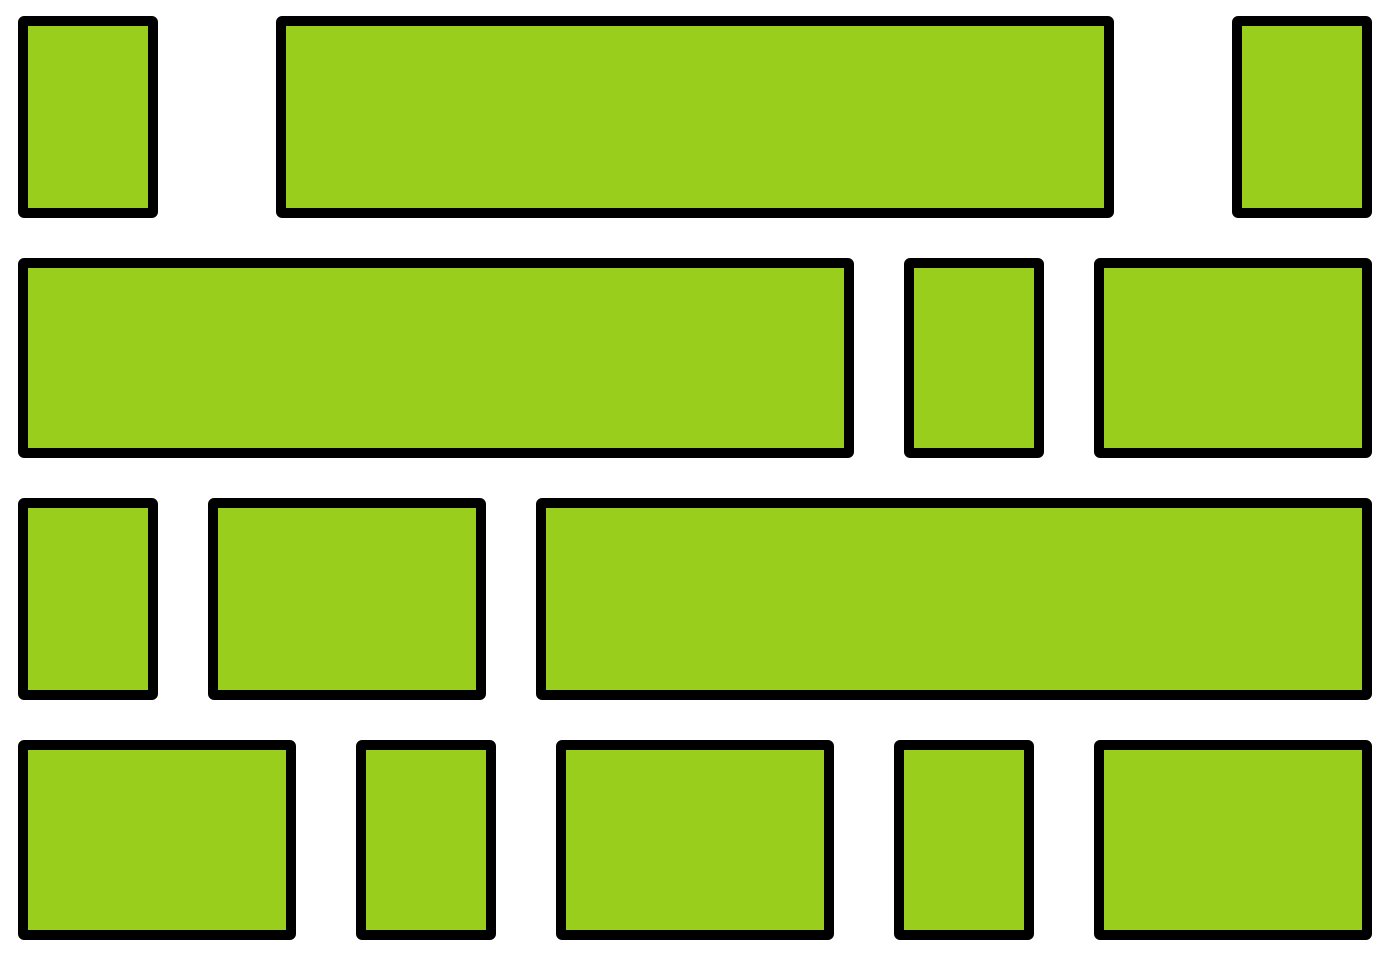 Example of a flexbox layout